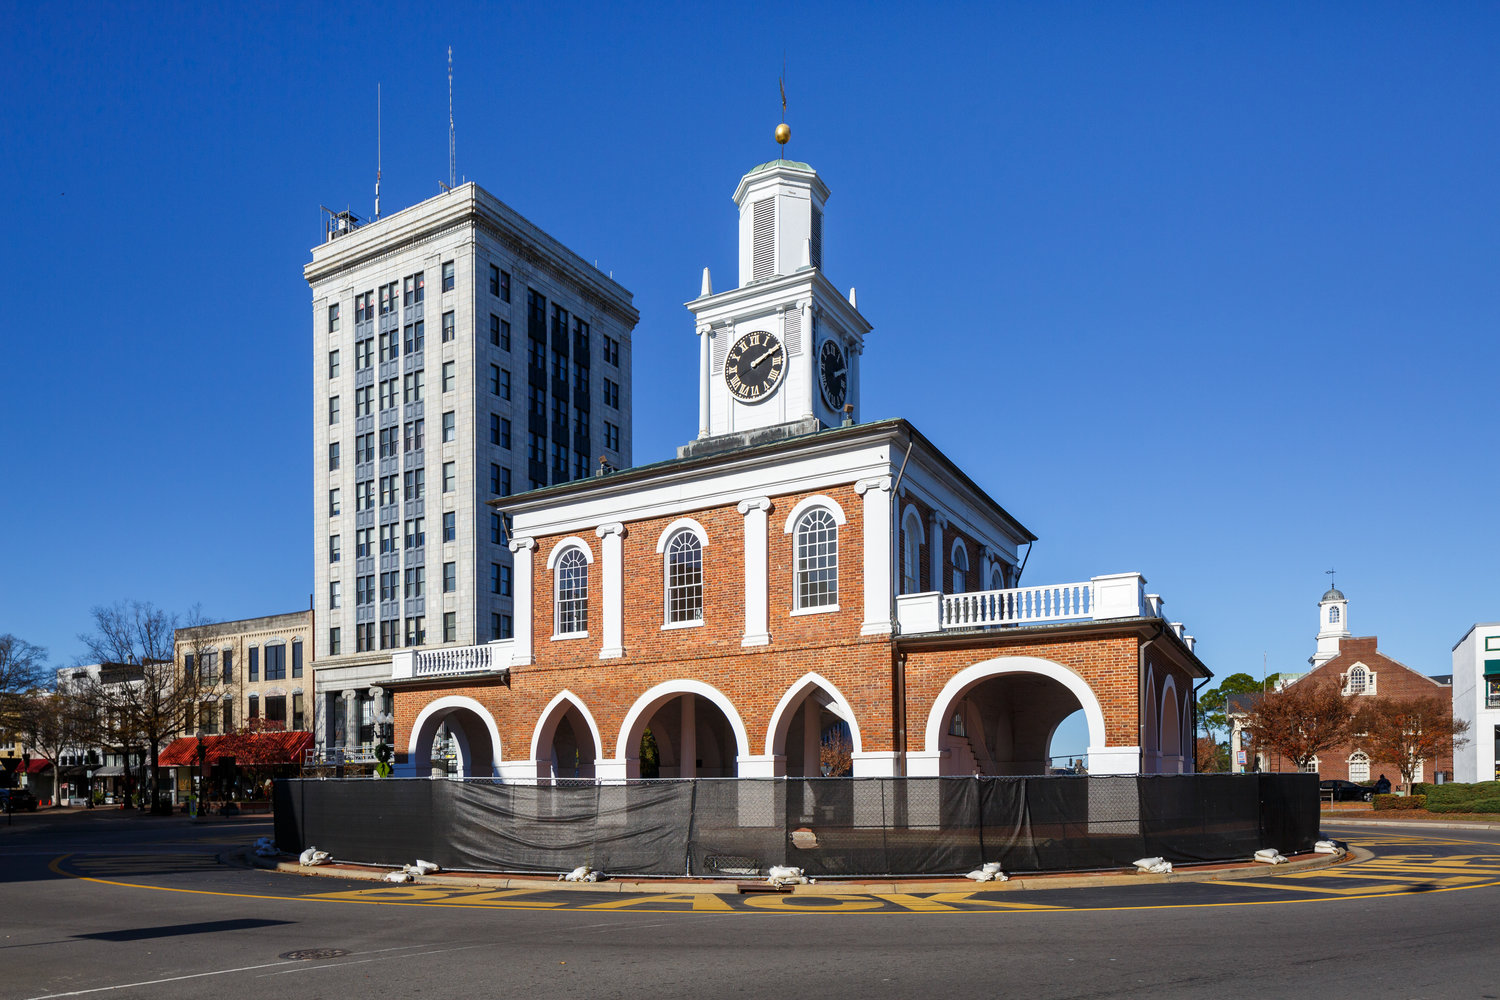 The Fayetteville City Council on Monday voted to remove the fencing from around the Market House.